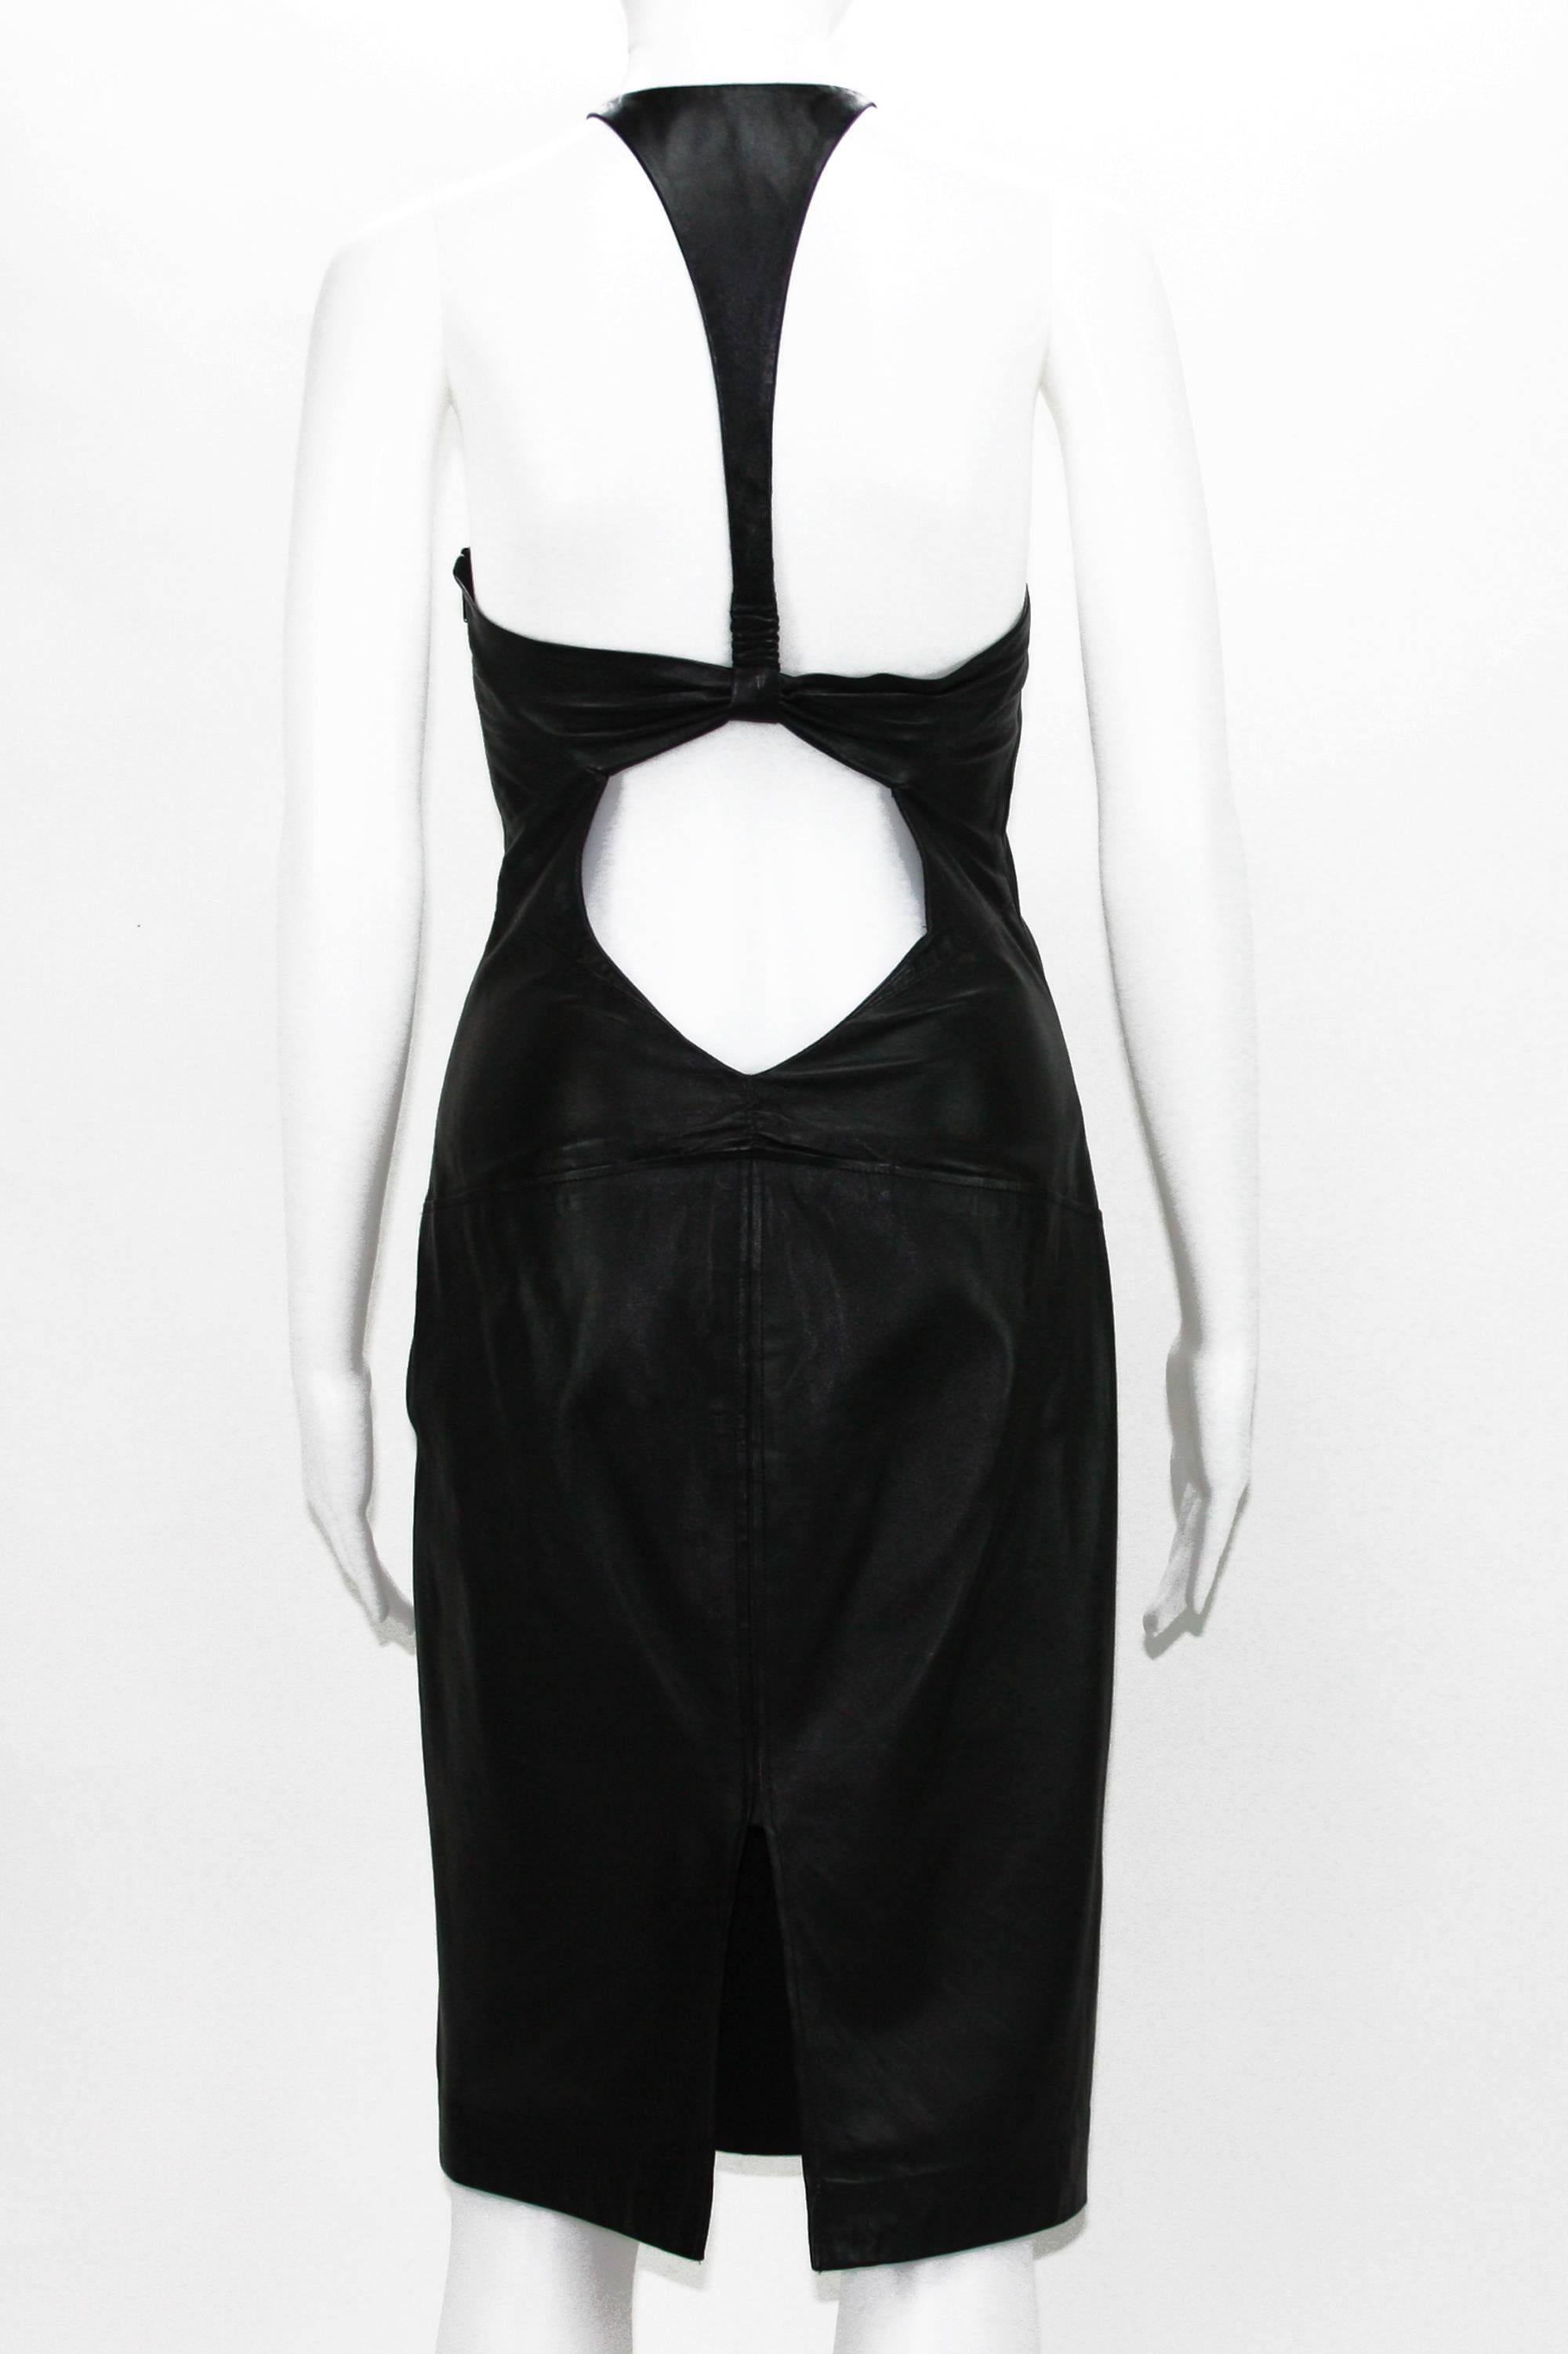 Tom Ford for Gucci 2004 Collection Black Leather Cocktail Dress It. 44 - US 8 In Excellent Condition For Sale In Montgomery, TX